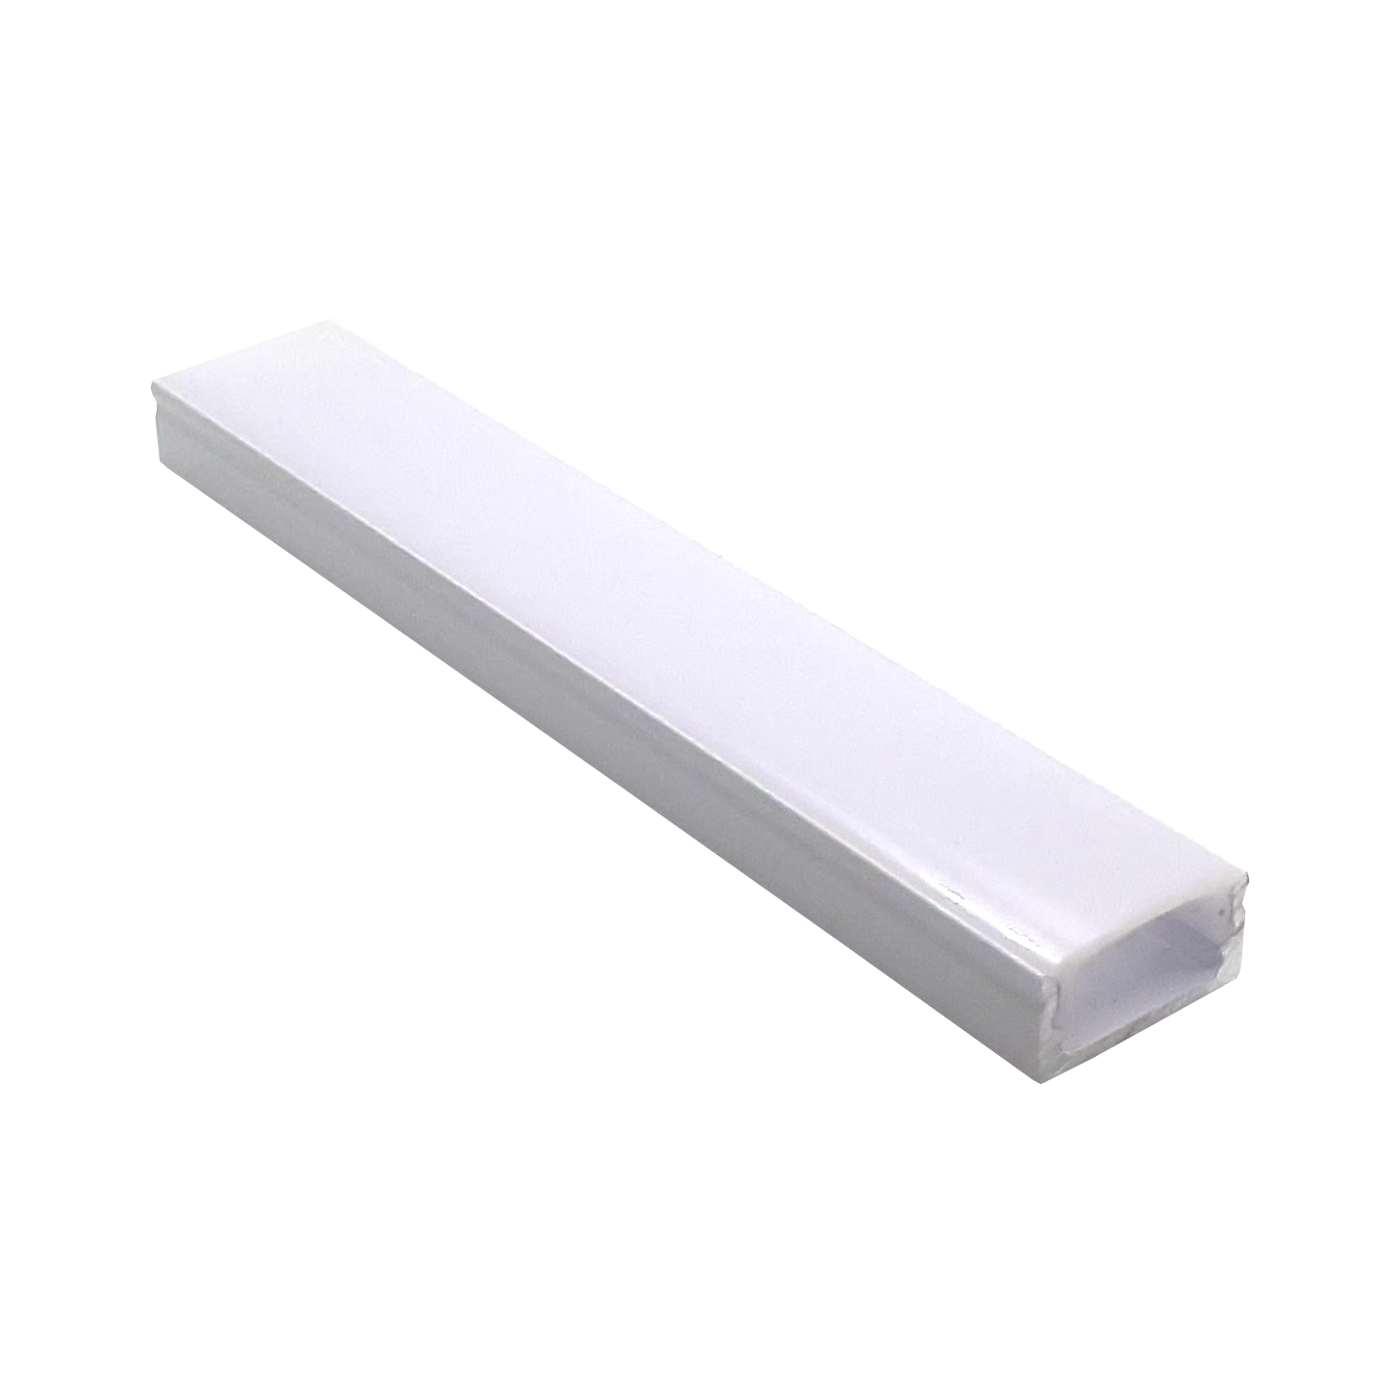 Product image of LXT11 White Shallow Extrusion for LED strip